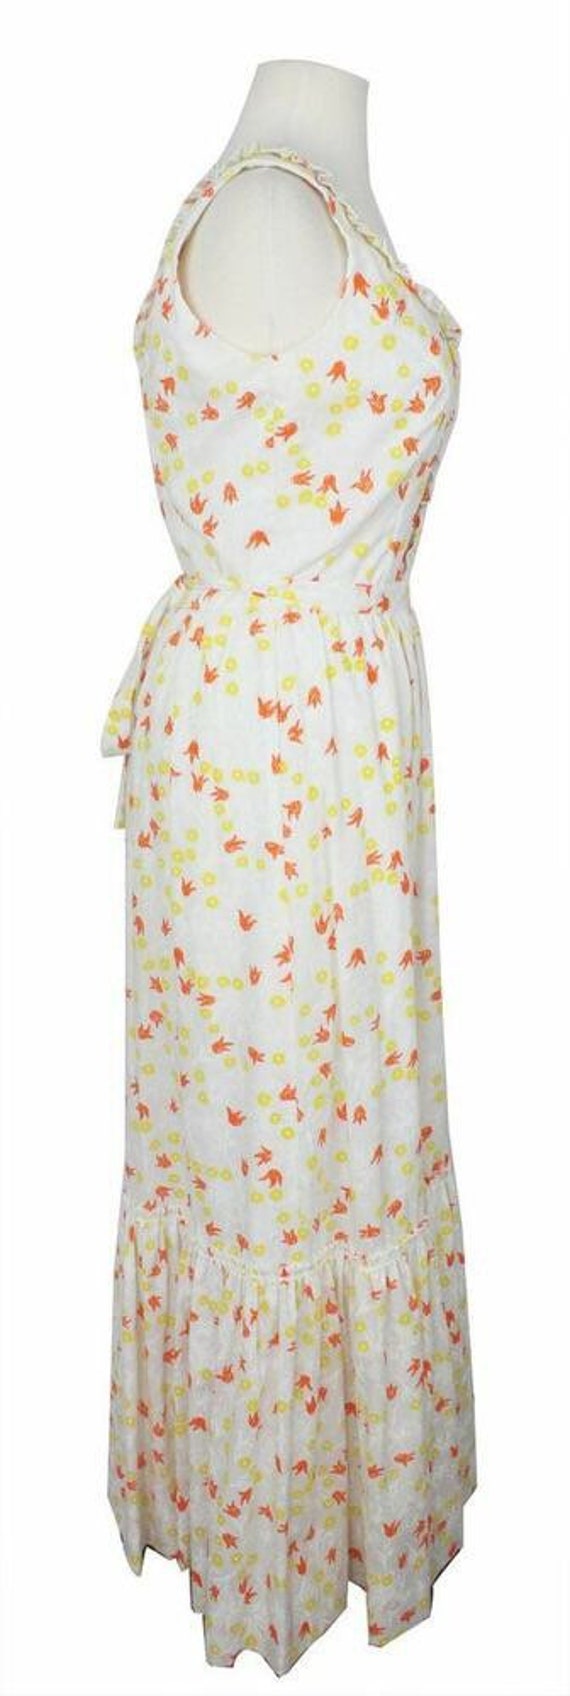 Vintage Lilly Pulitzer 1960s White Maxi Dress wit… - image 3